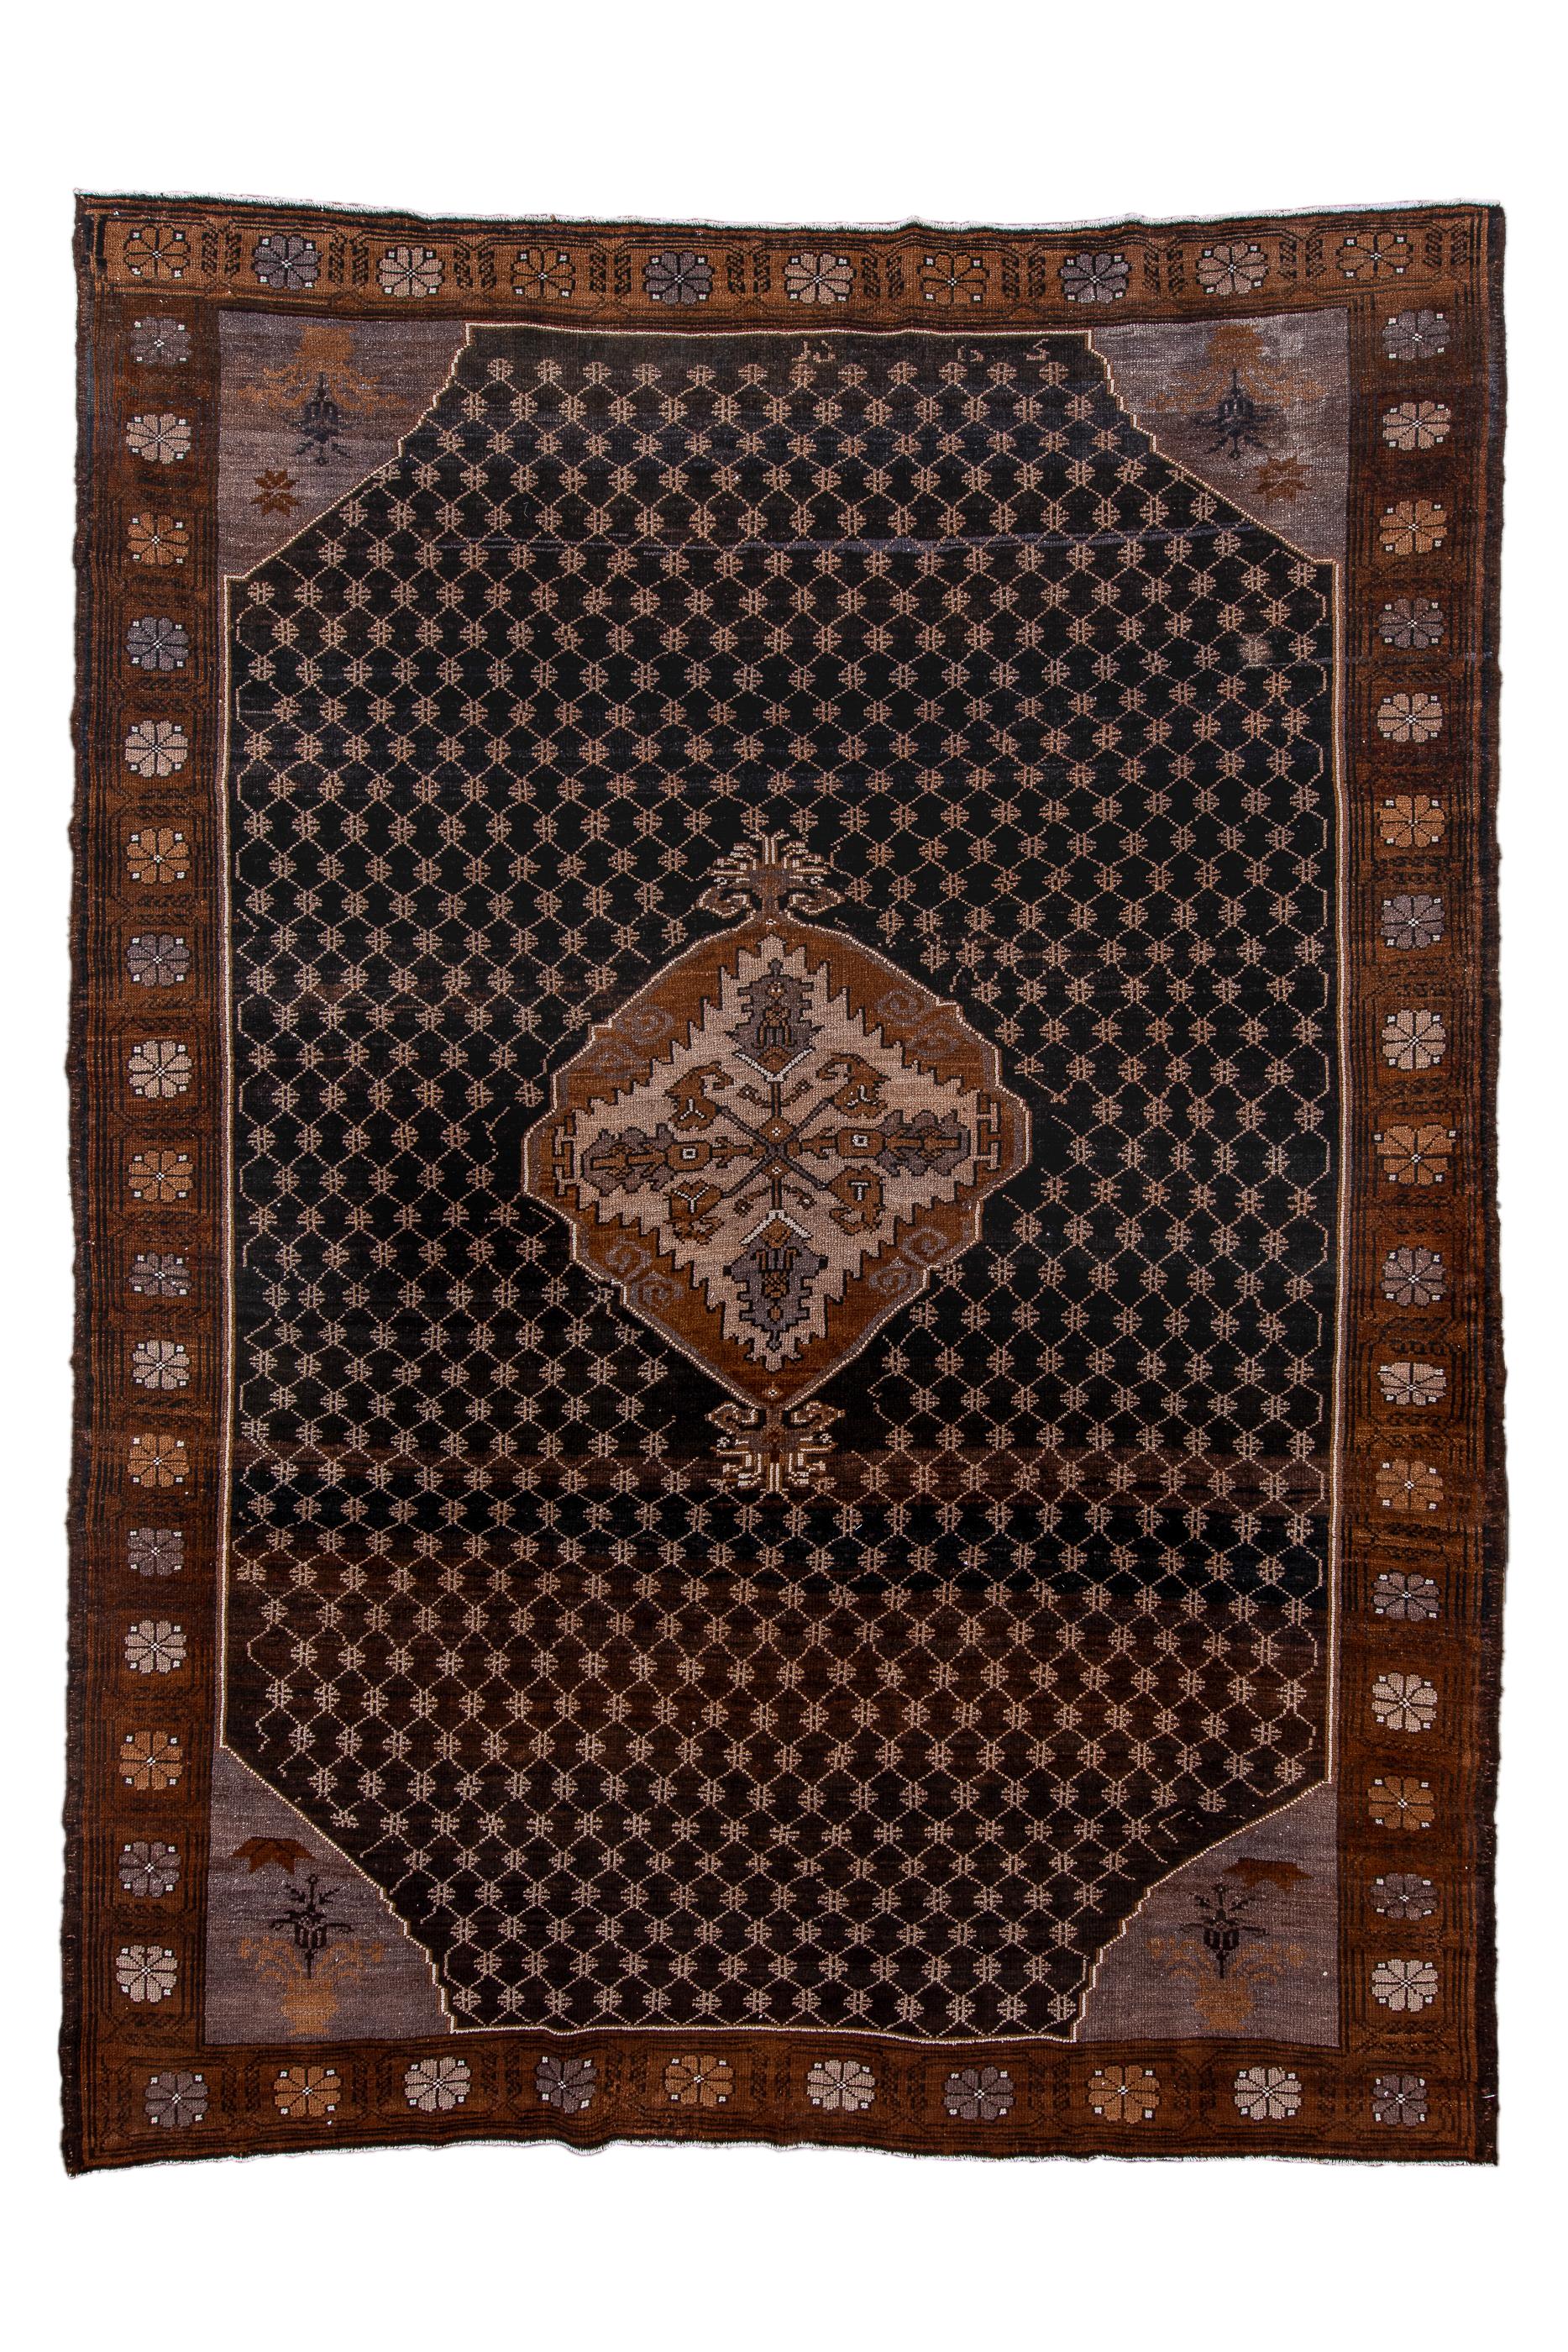 This moderately woven village carpet shows a dark blue field overlaid by a small lattice with small crosses at the vertices and in turn supporting an irregular red and ecru floating medallion with a radiating cruciform blossom central motif.